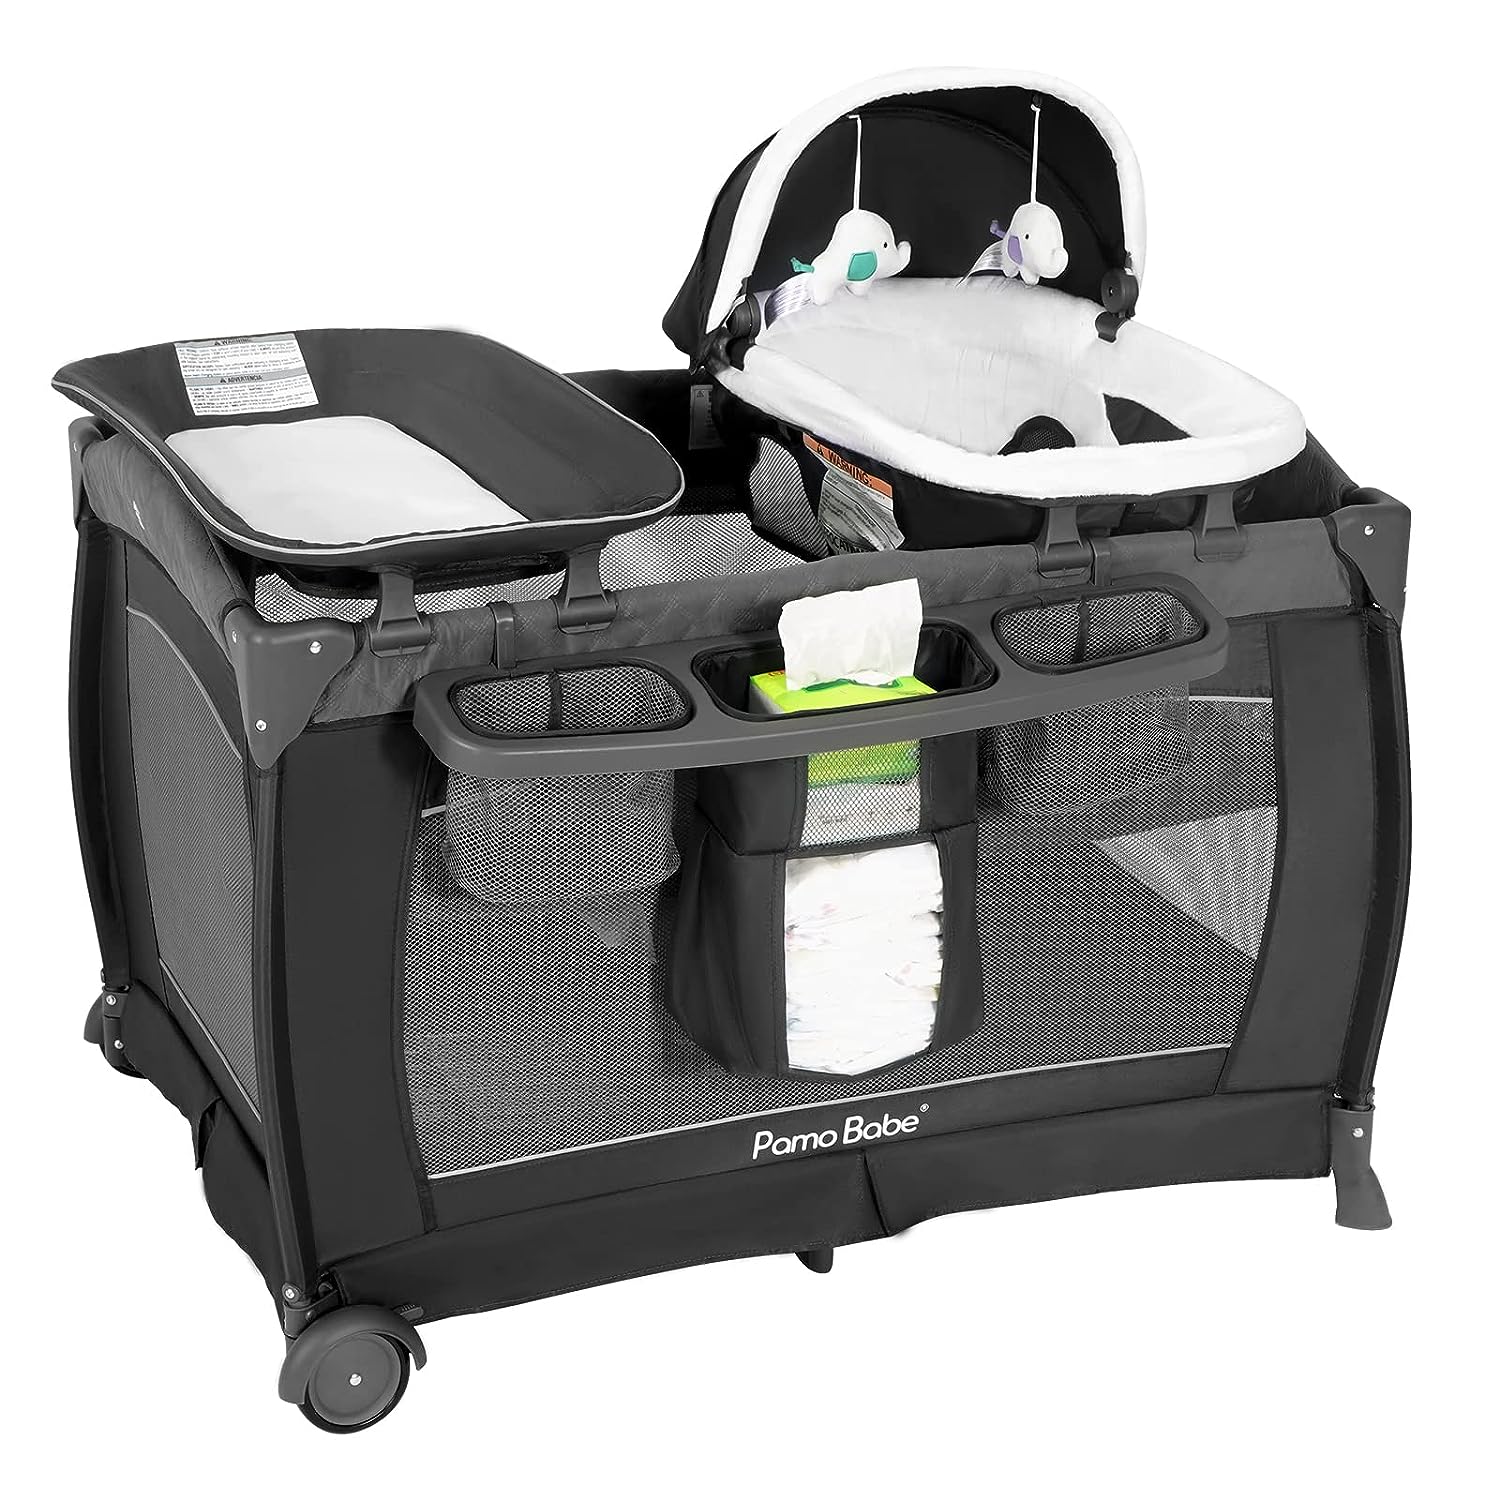 Pamo Babe Playard Deluxe Nursery Center, Foldable Playpen for Baby